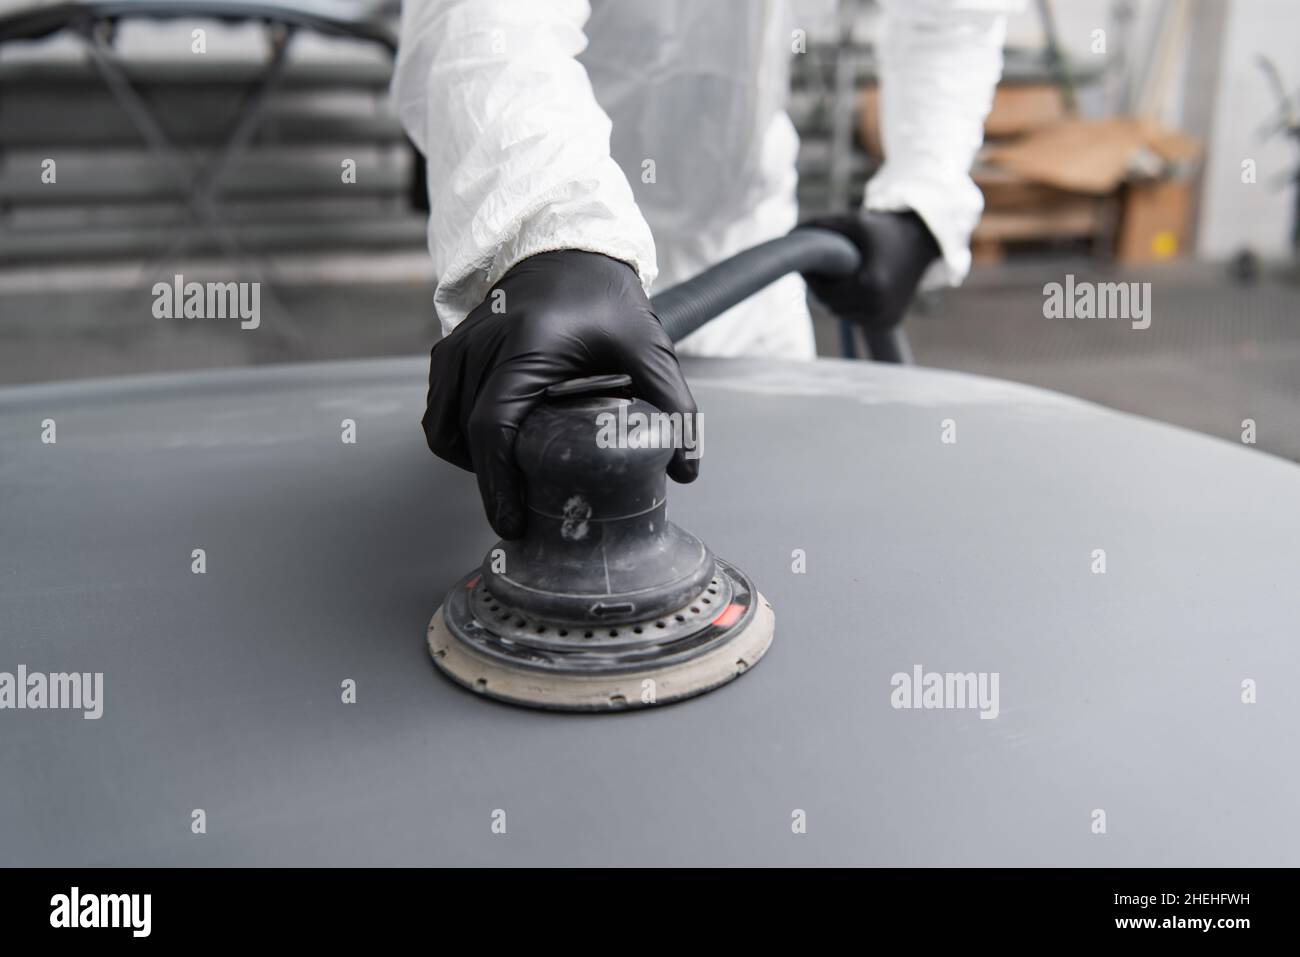 Cropped view of workman in gloves and hazmat suit polishing car in garage Stock Photo